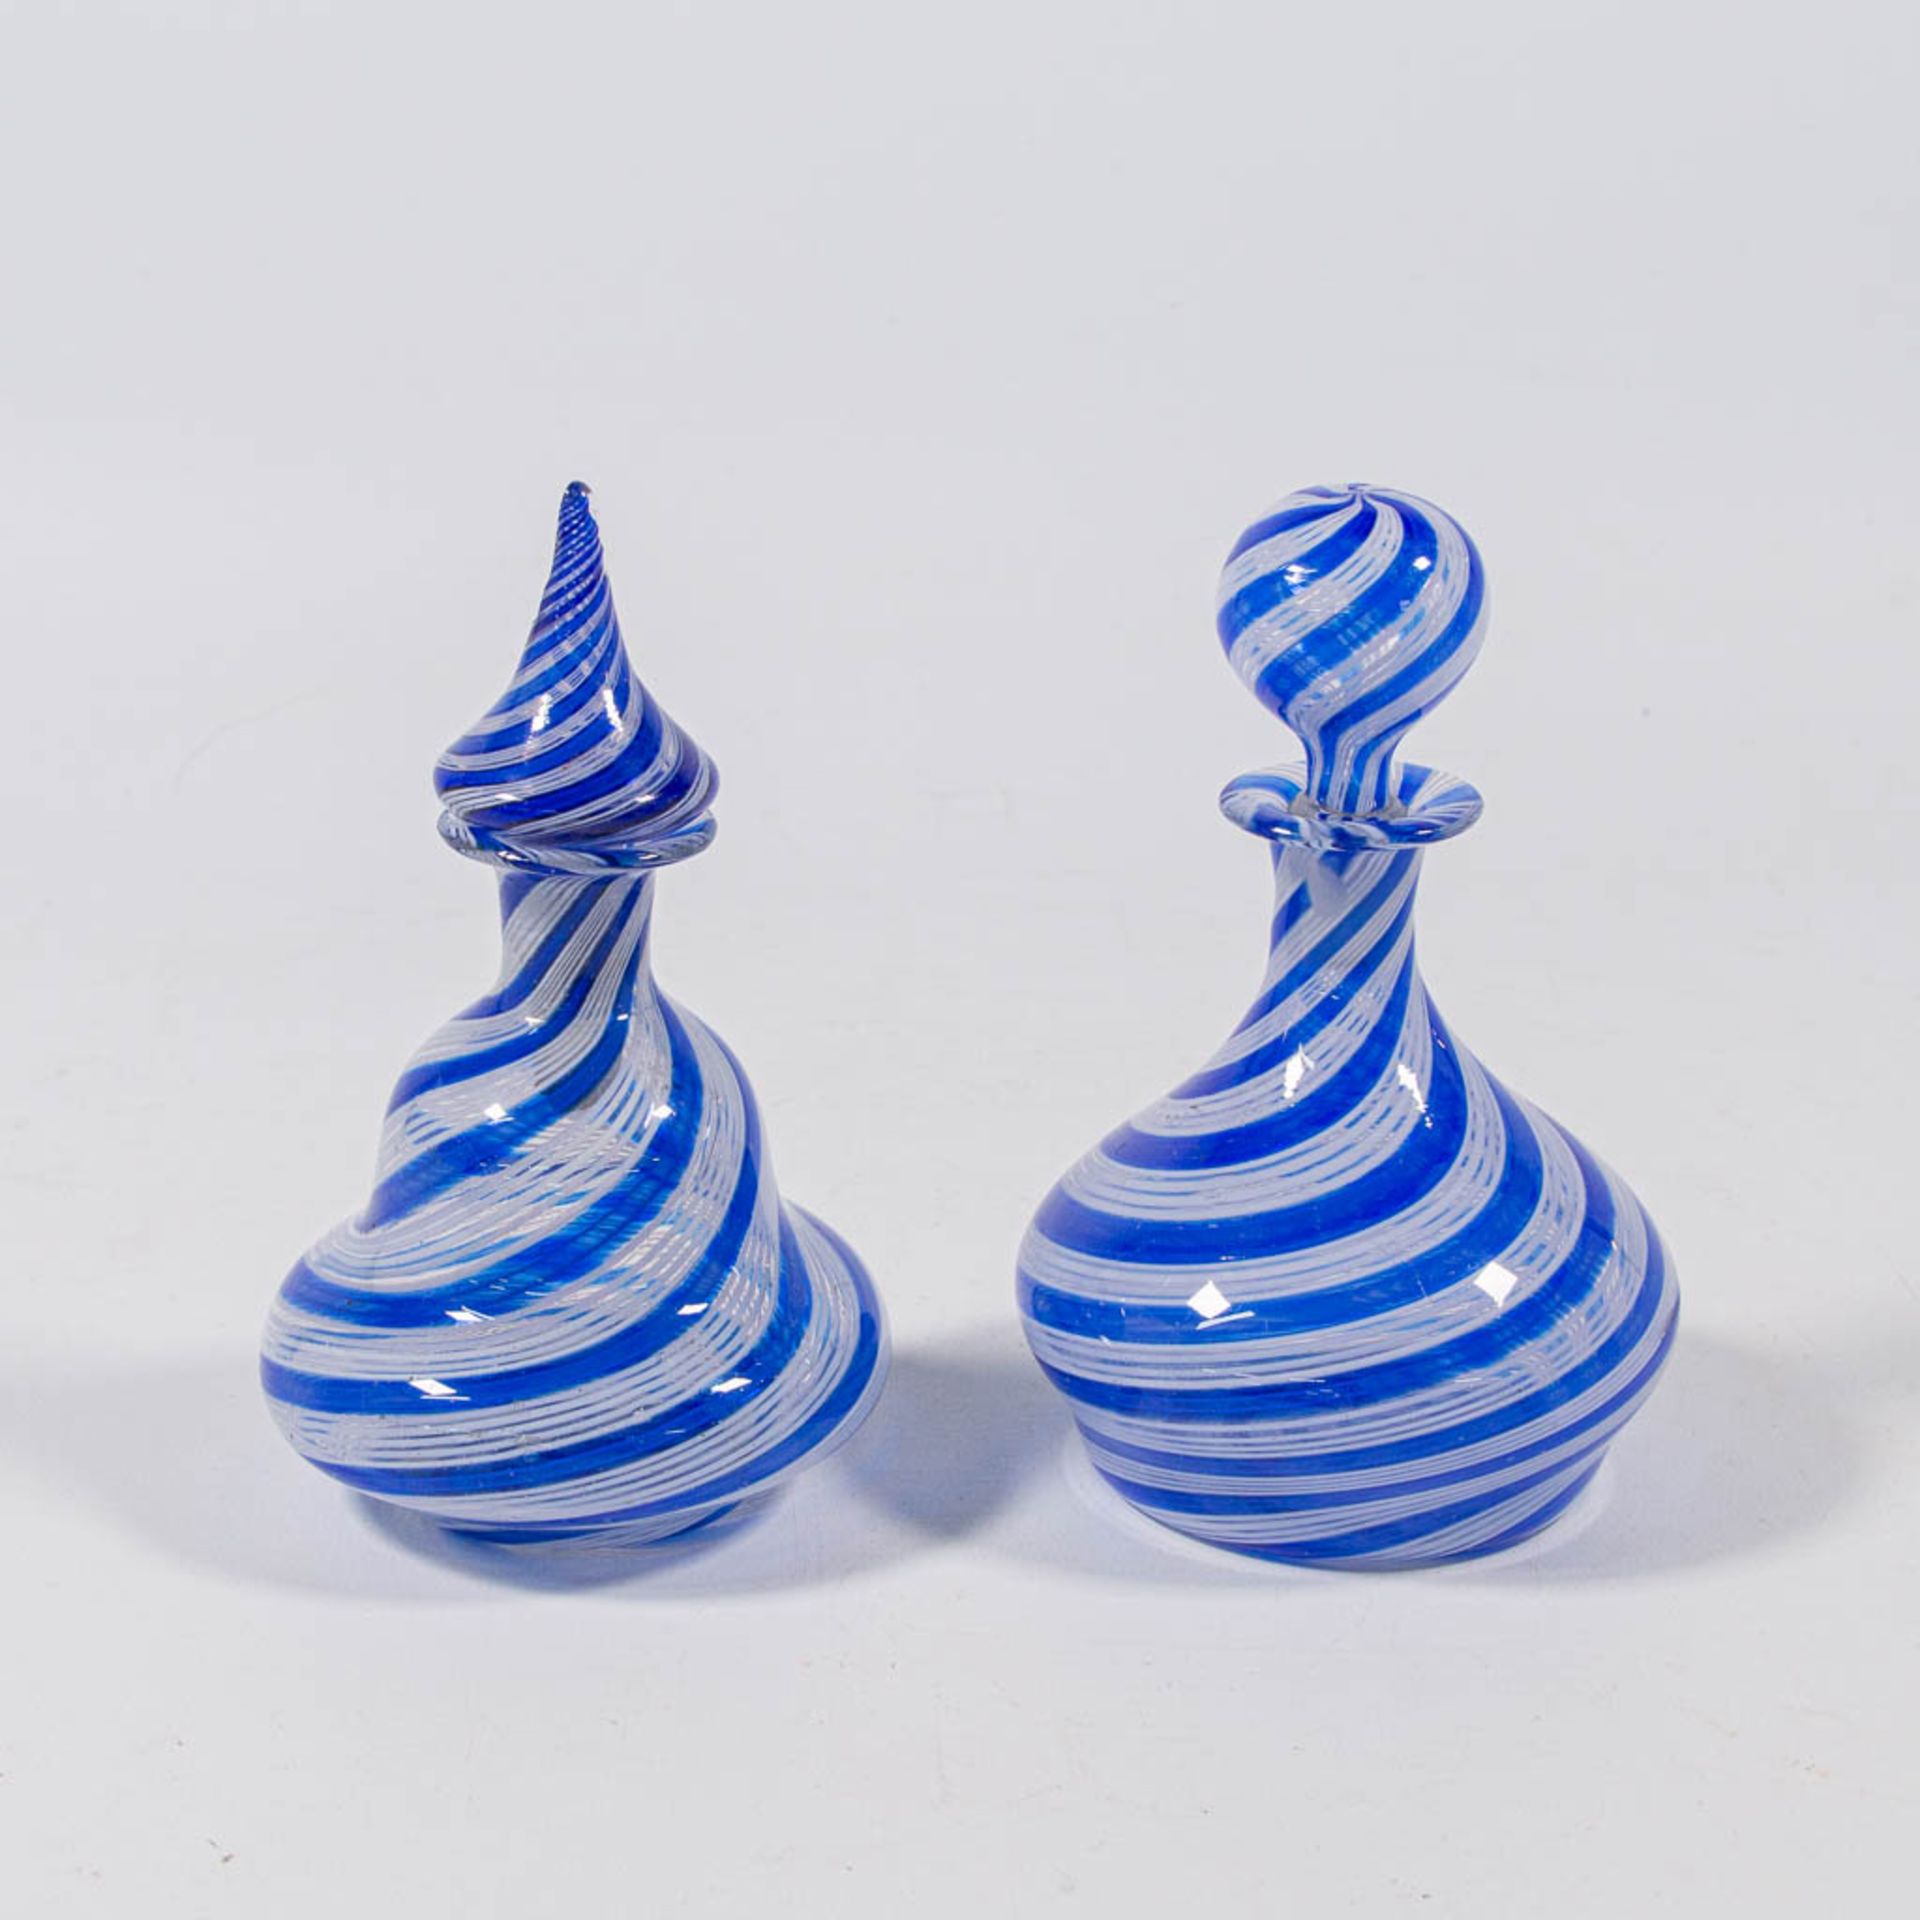 A pair of  decanters with stopper, made in Murano, Italy around 1950. (15 x 9 cm)